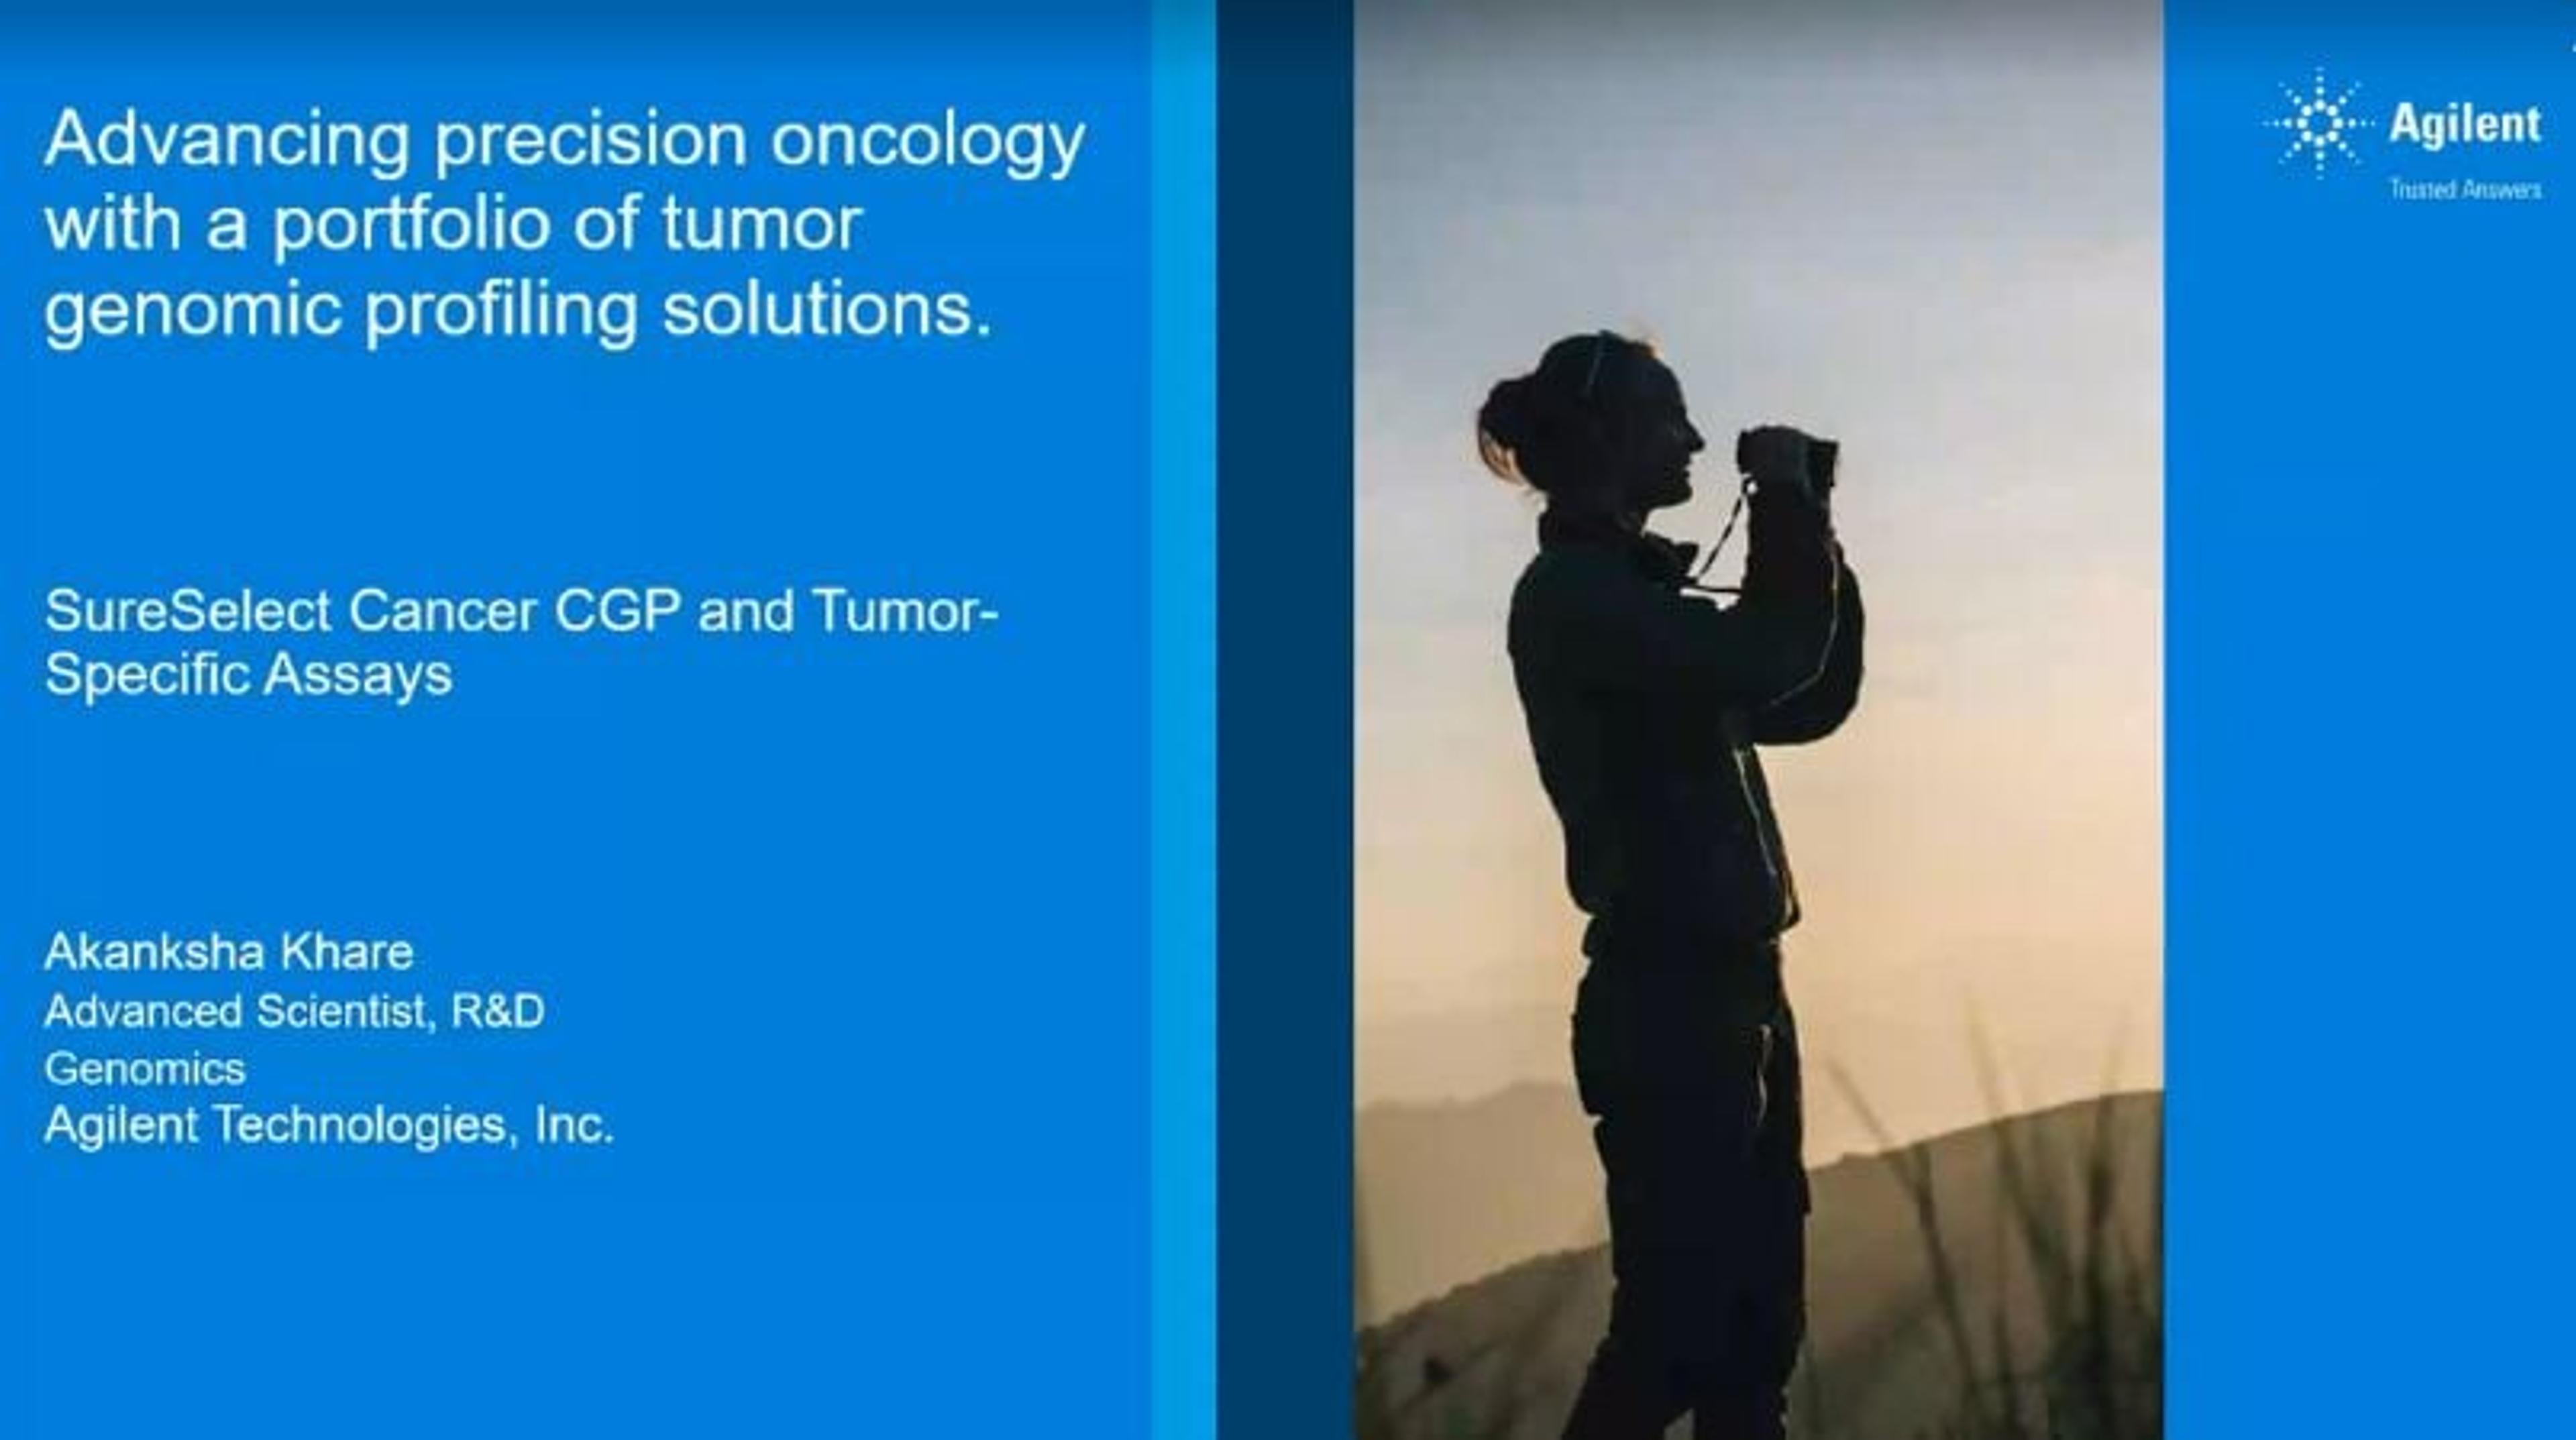 Advancing precision oncology with a portfolio of tumor genomic profiling solutions